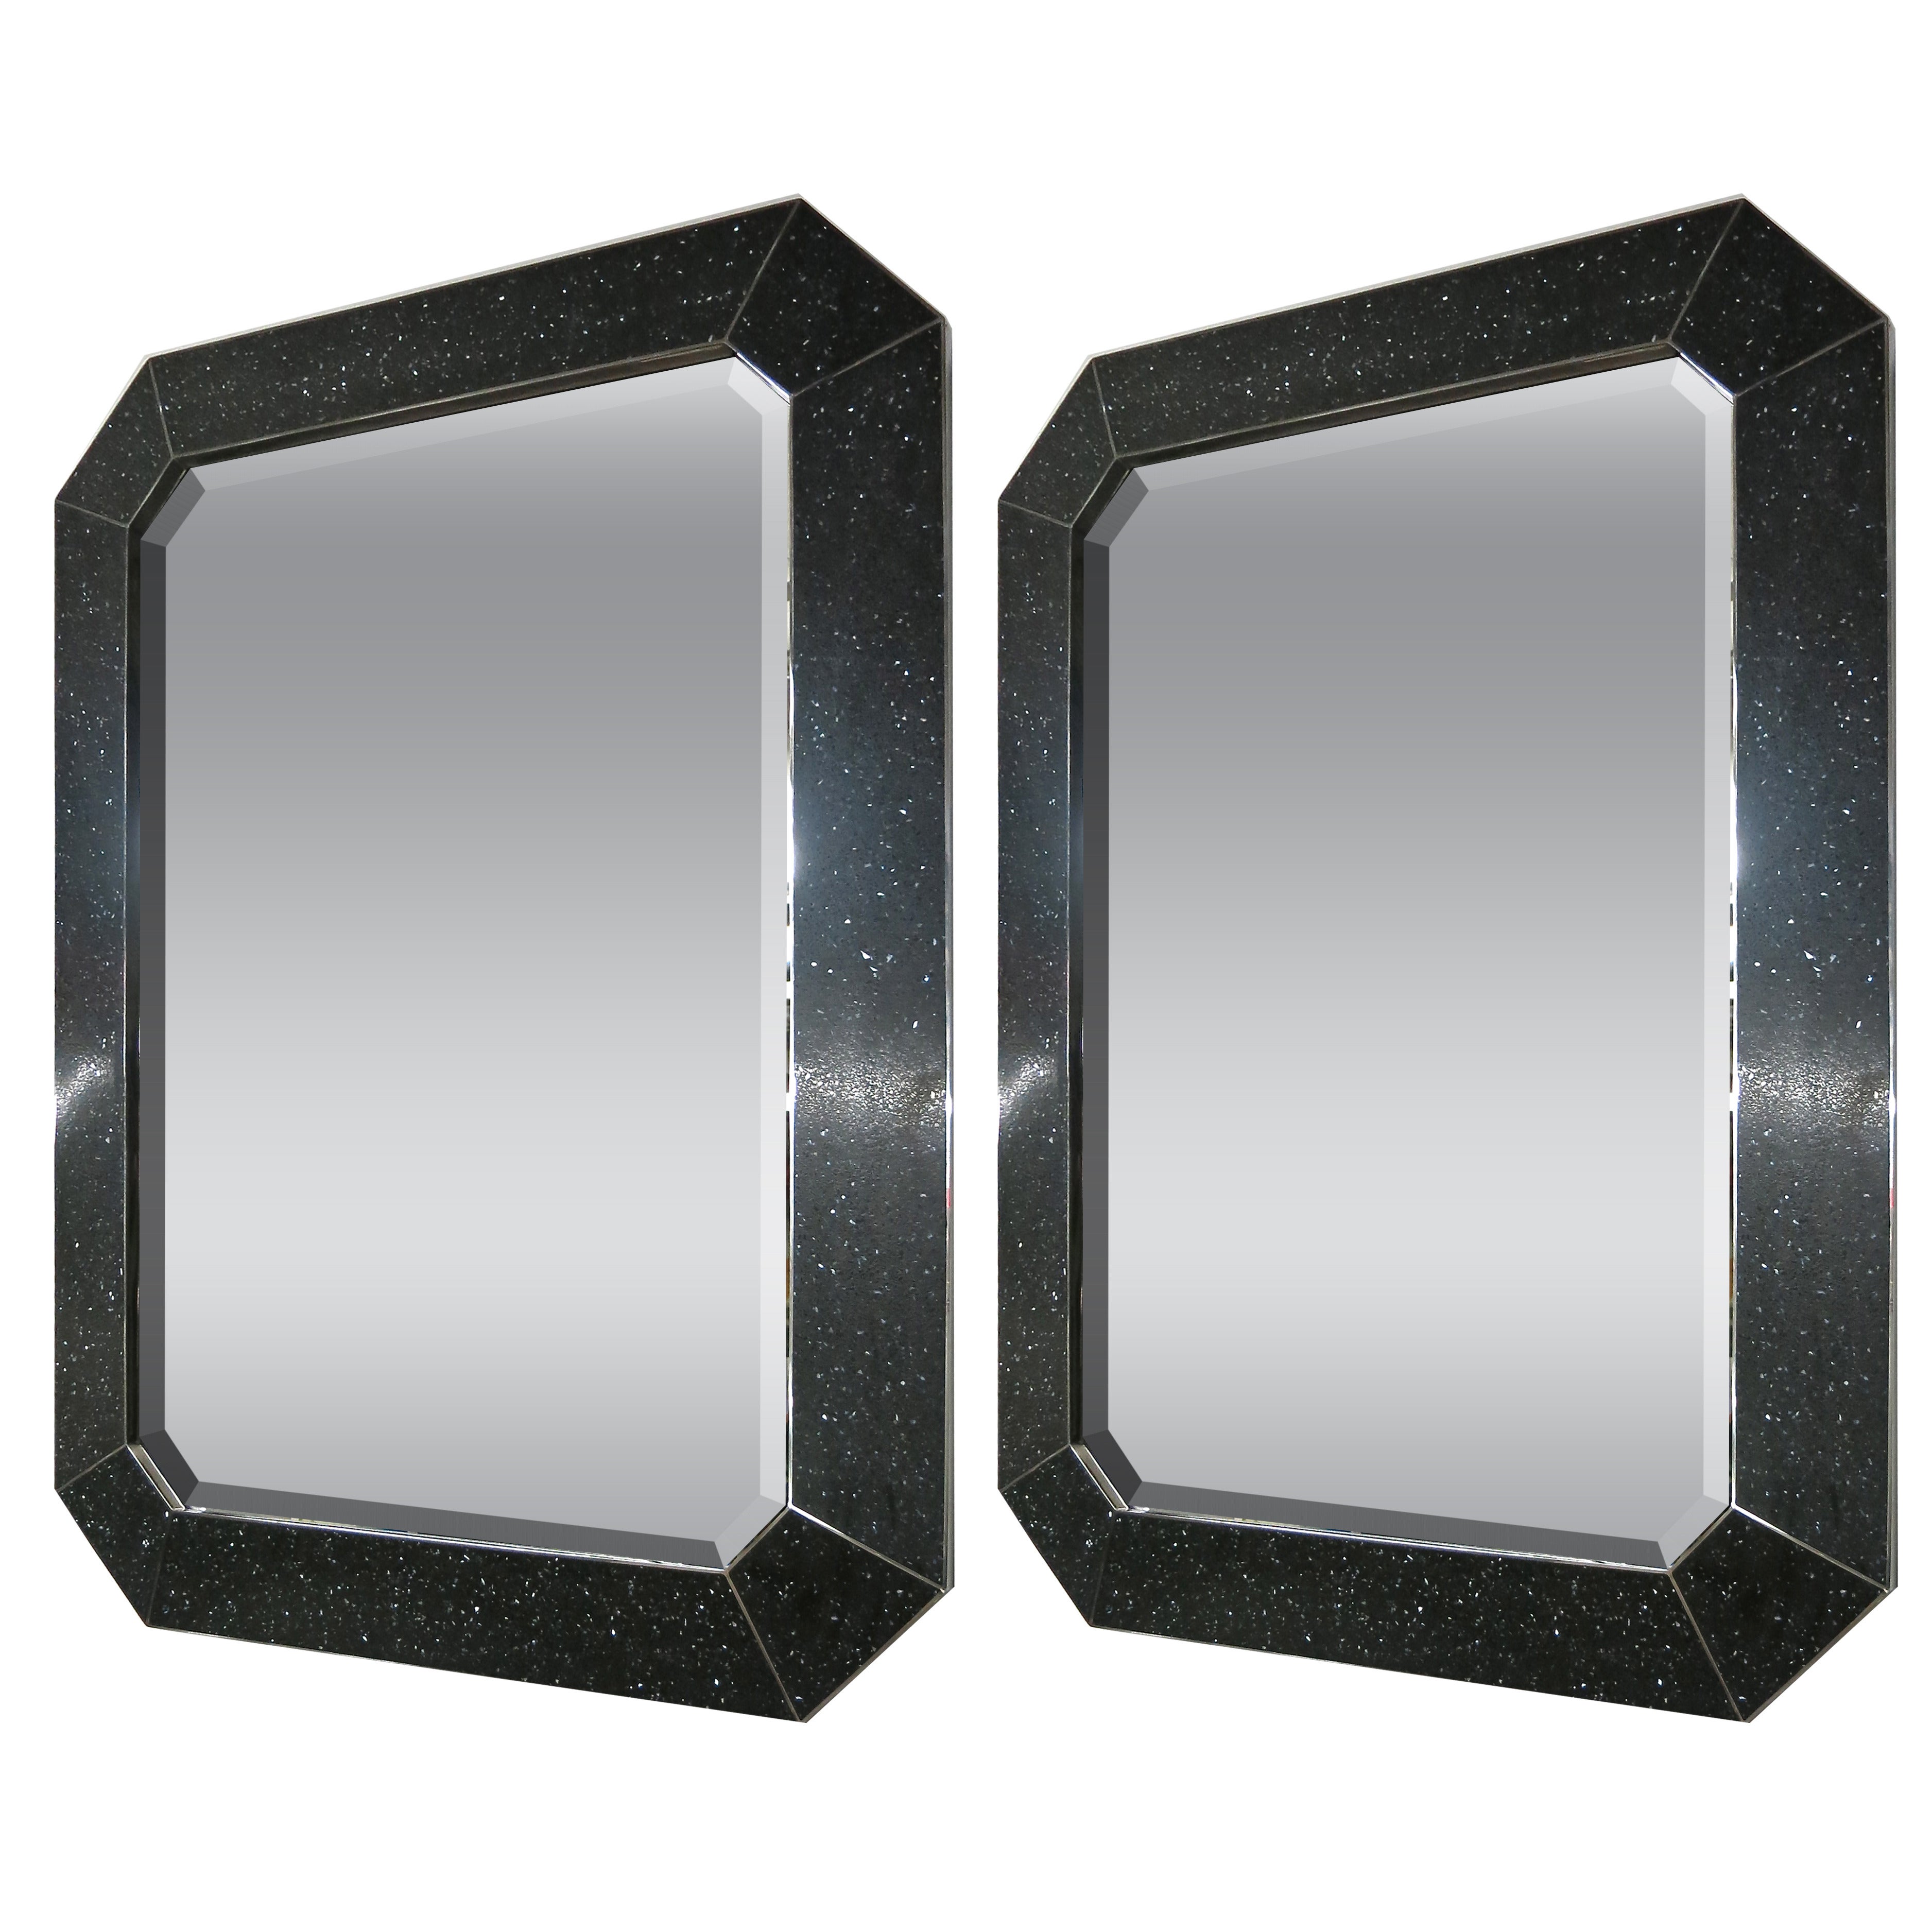 Pair of Beveled Mirrors with Black Stone by Maitland Smith, circa 1975